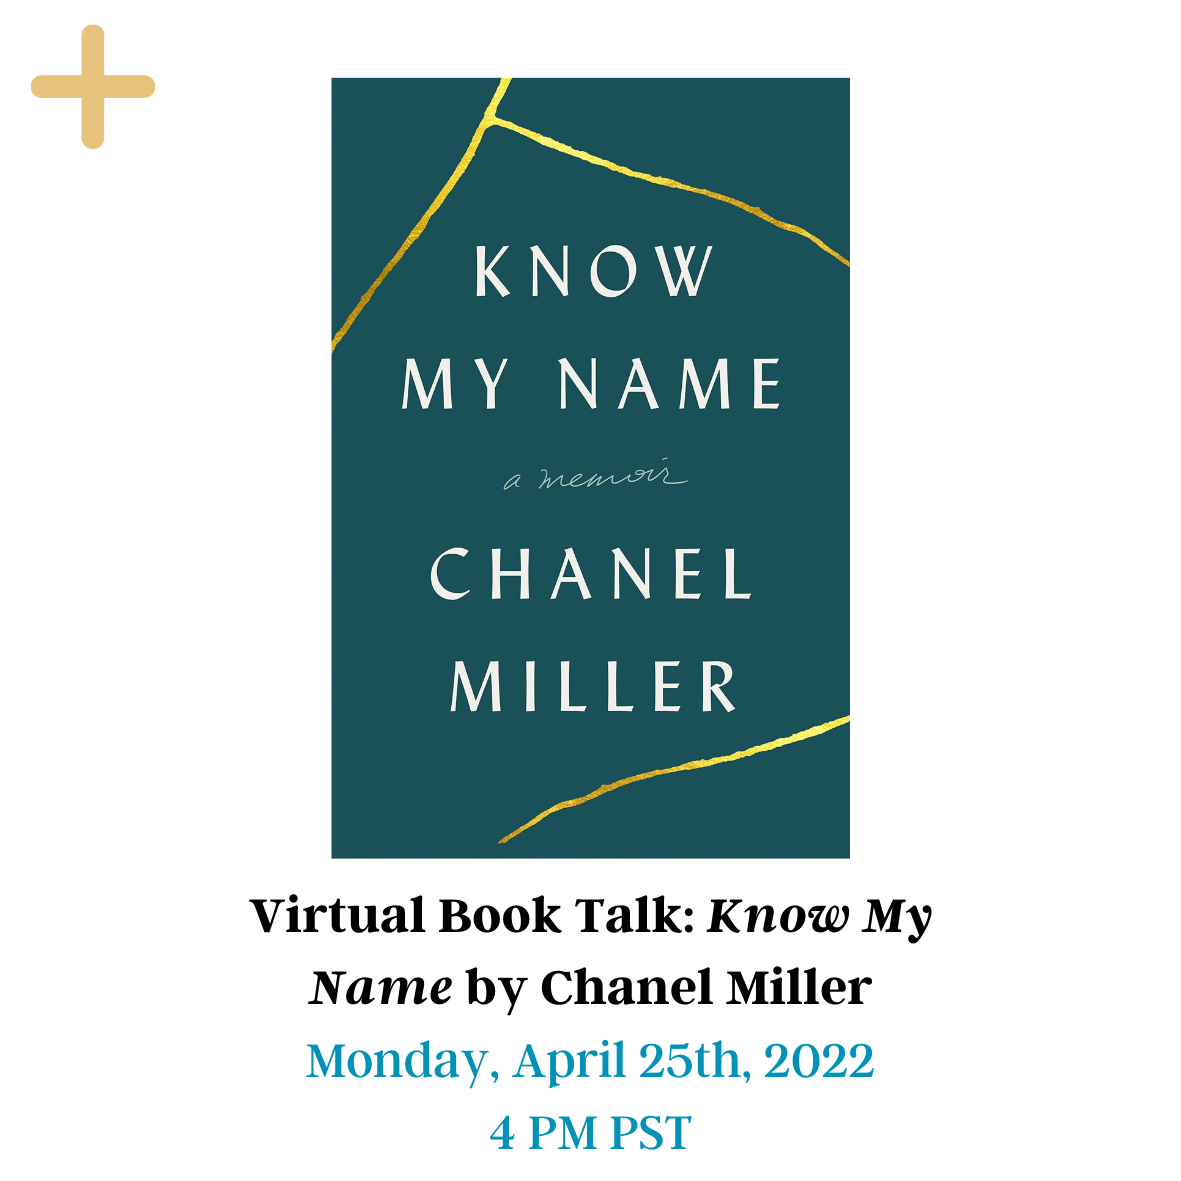 Virtual Book Talk: Know My Name by Chanel Miller cover page with the cover of the book displayed. The book cover has a teal background with 3 gold cracks and KNOW MY NAME a memoir CHANEL MILLER written. The yellow button on the top can be clicked and will provide more information. The picture has a date at the bottom: Monday, April 25th, 2022 4 PM PST